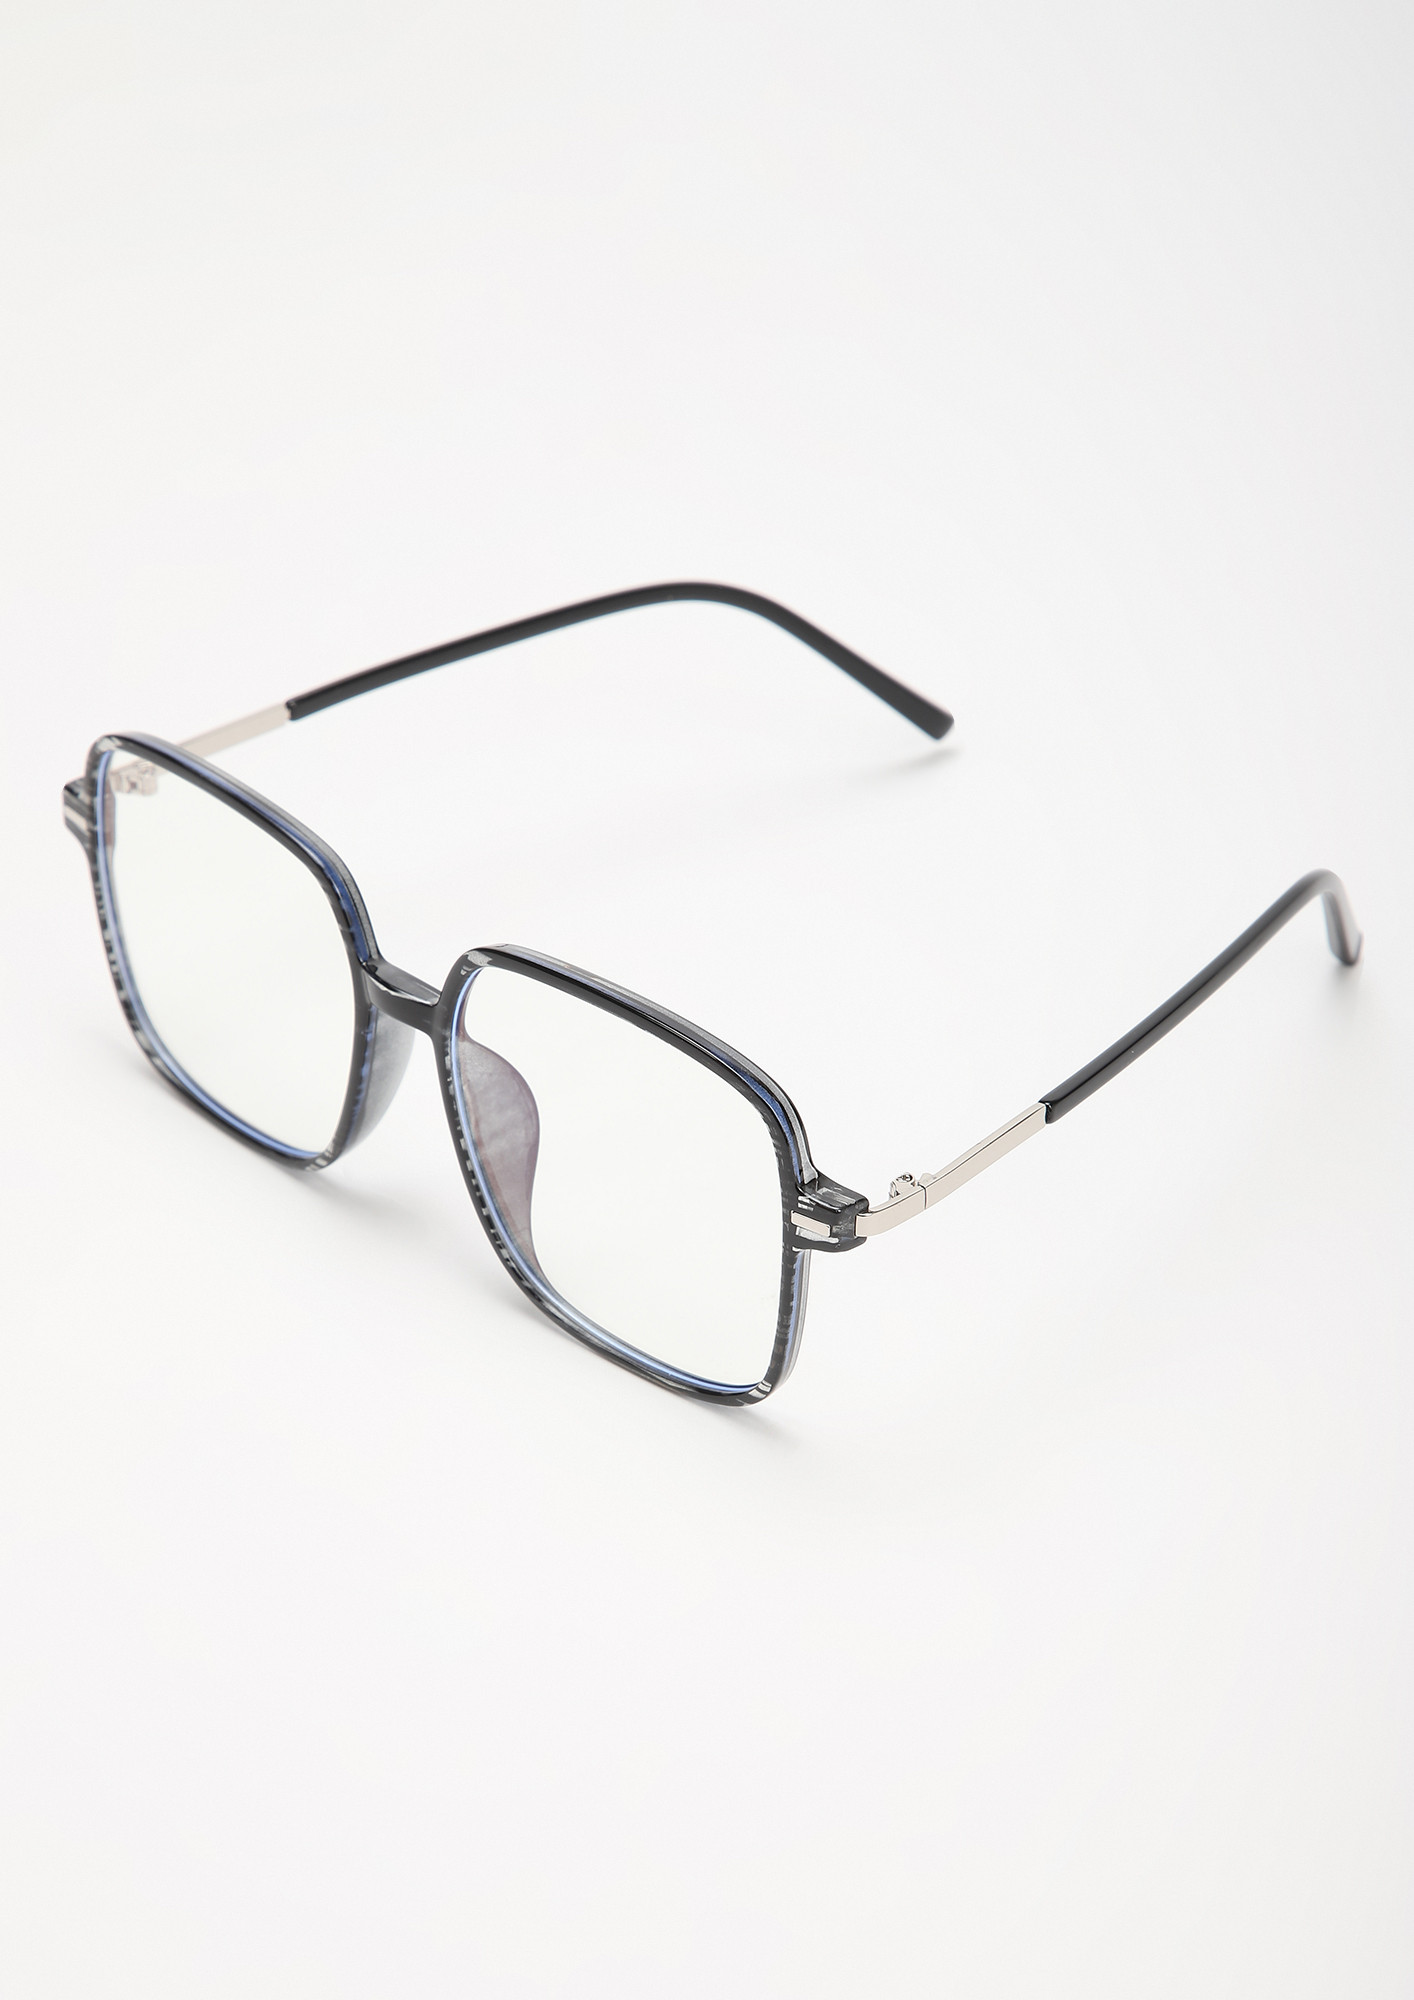 STEER CLEAR GREY SQUARE FRAME SUNGLASSES